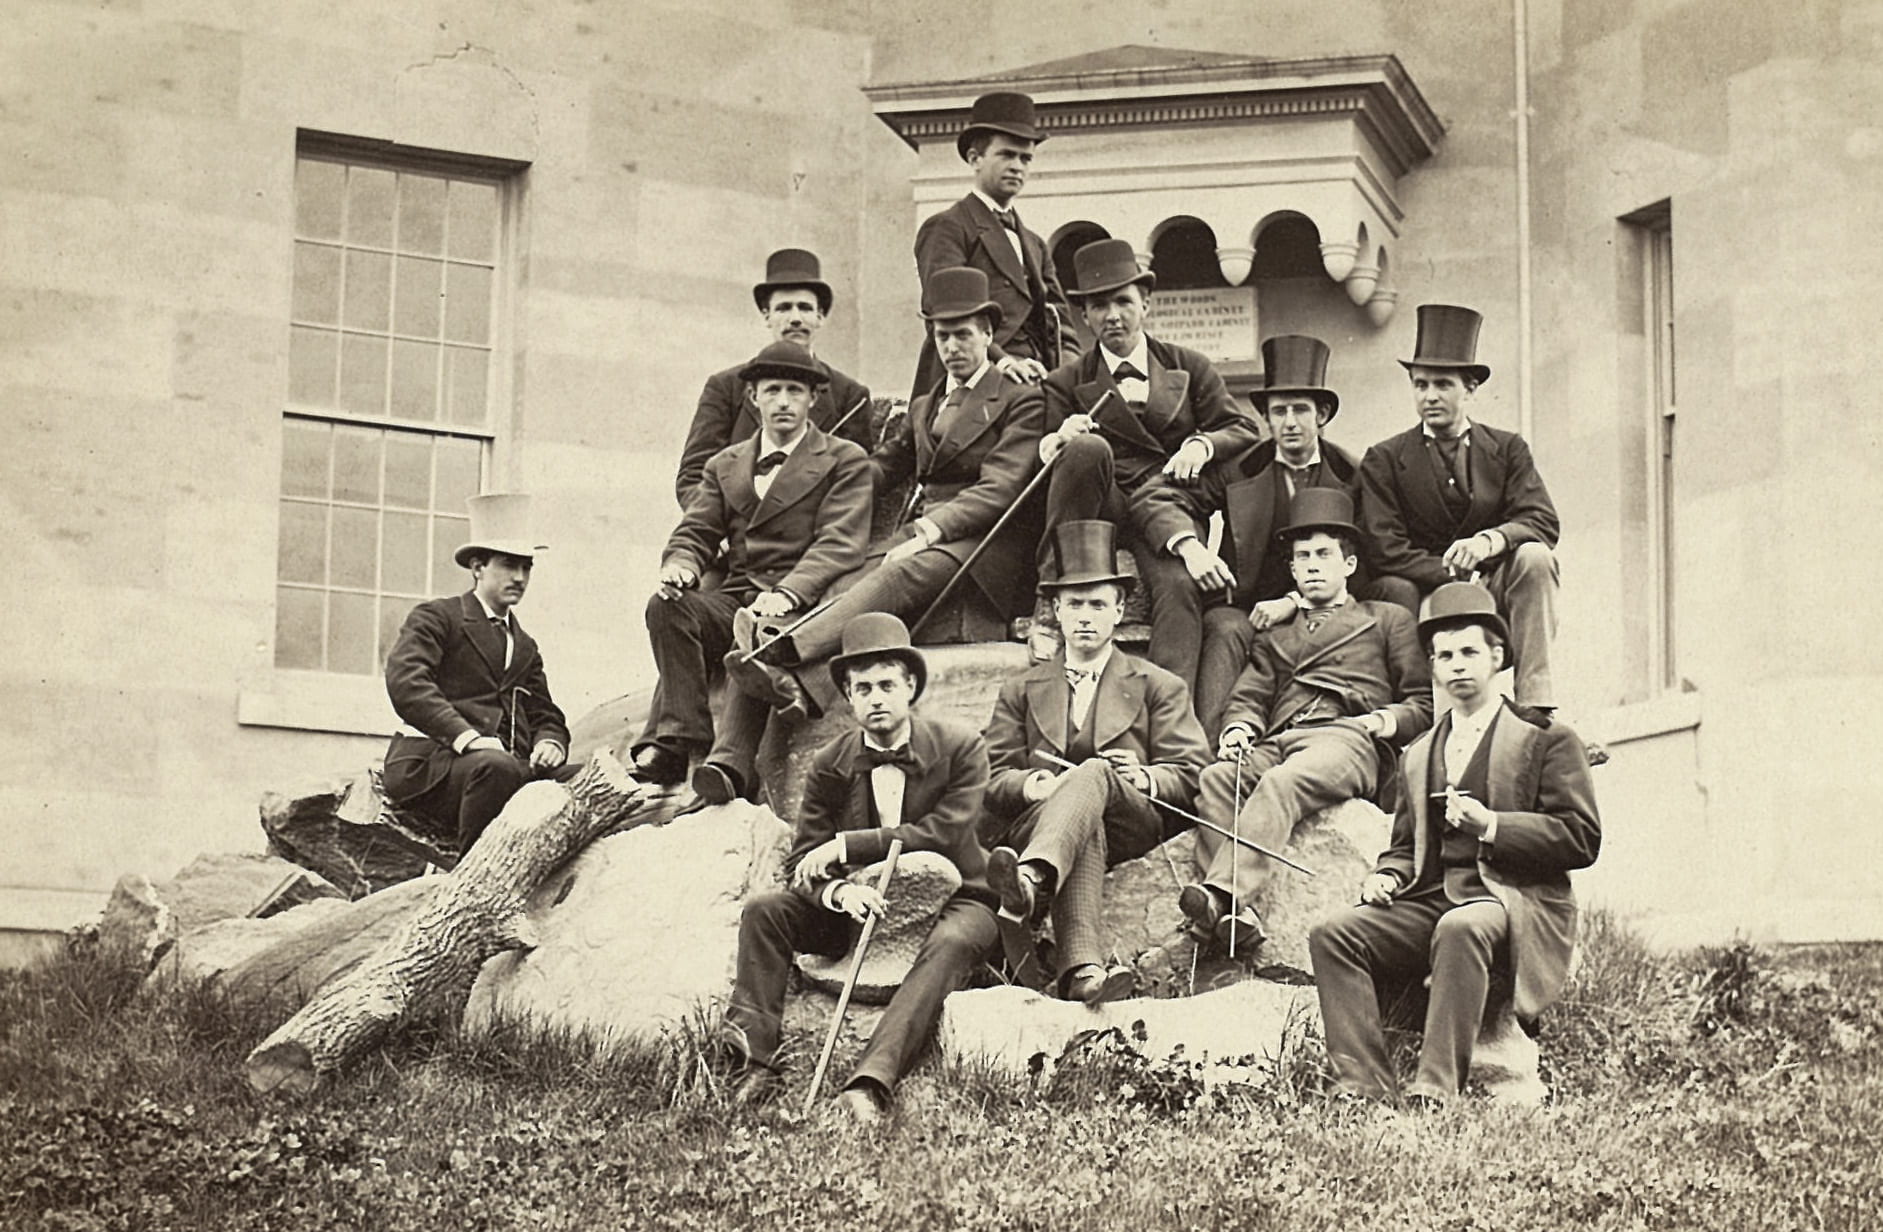 Photograph of a group of students with canes and top hats sitting on a large rock, probably from the 1880s.